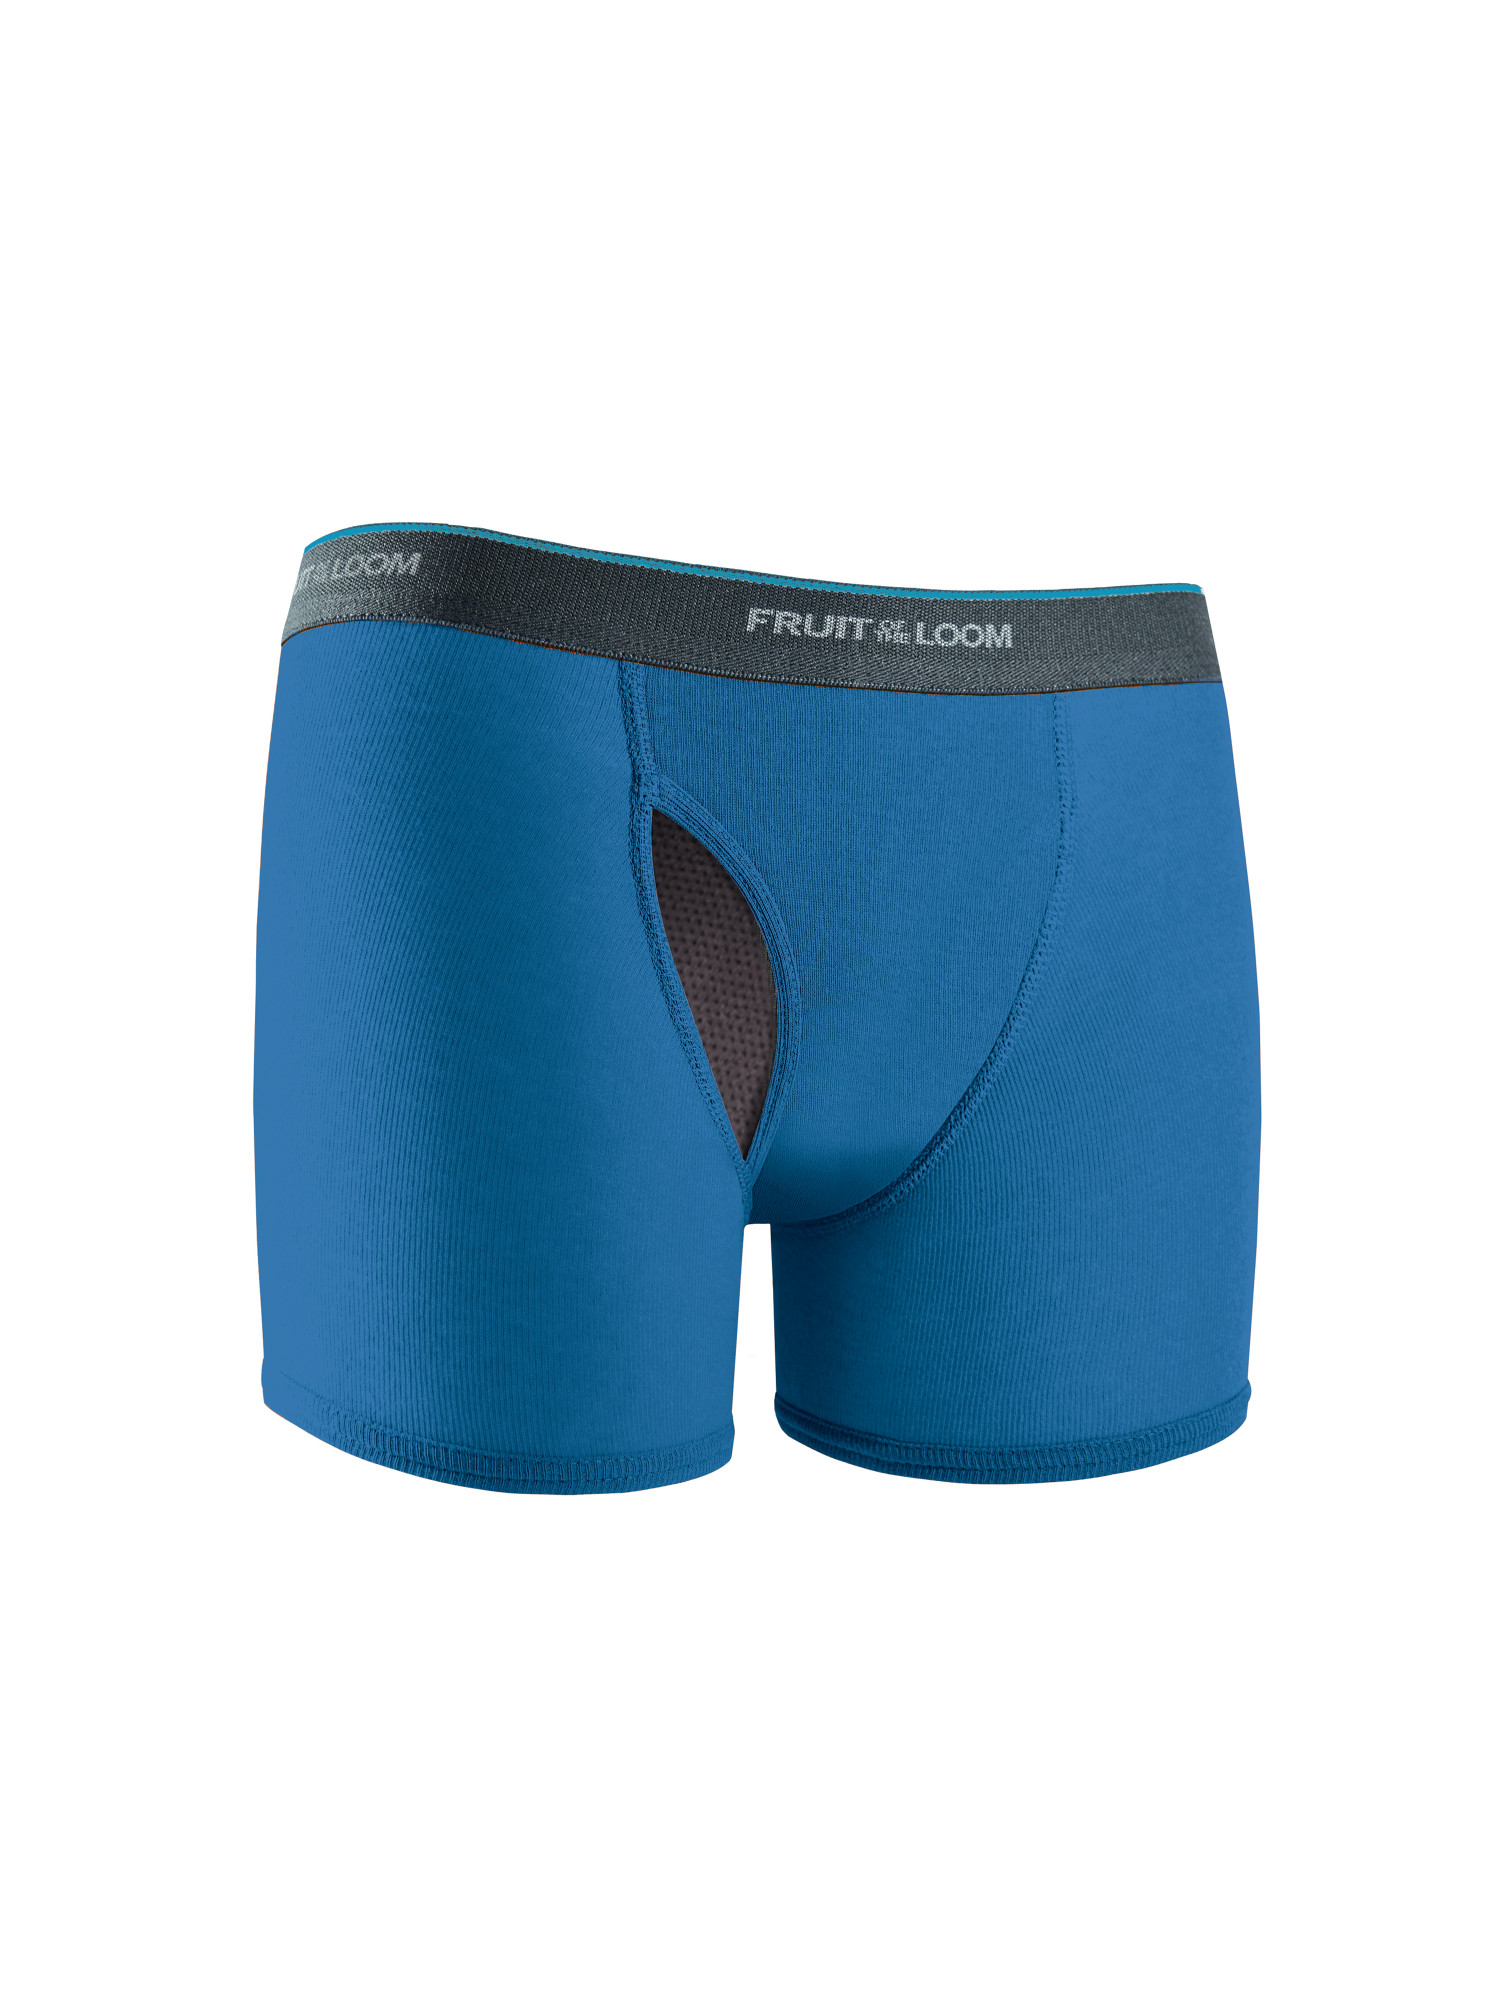 Fruit of the Loom Boys' CoolZone Boxer Briefs, 5 Pack - image 4 of 8